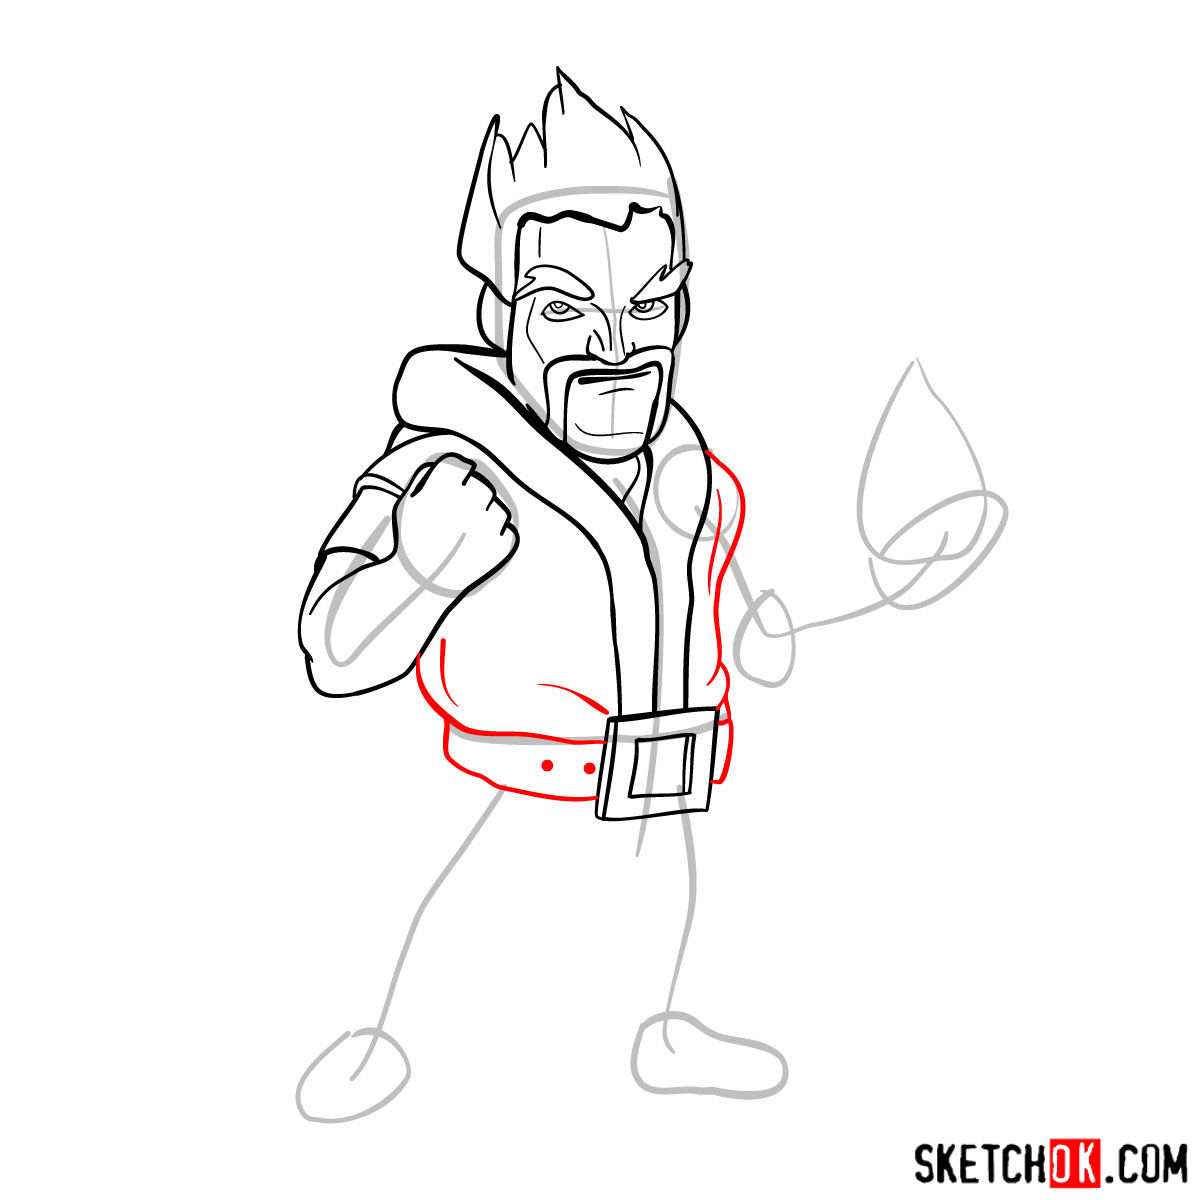 How to draw Ice Wizard from Clash of Clans - step 08